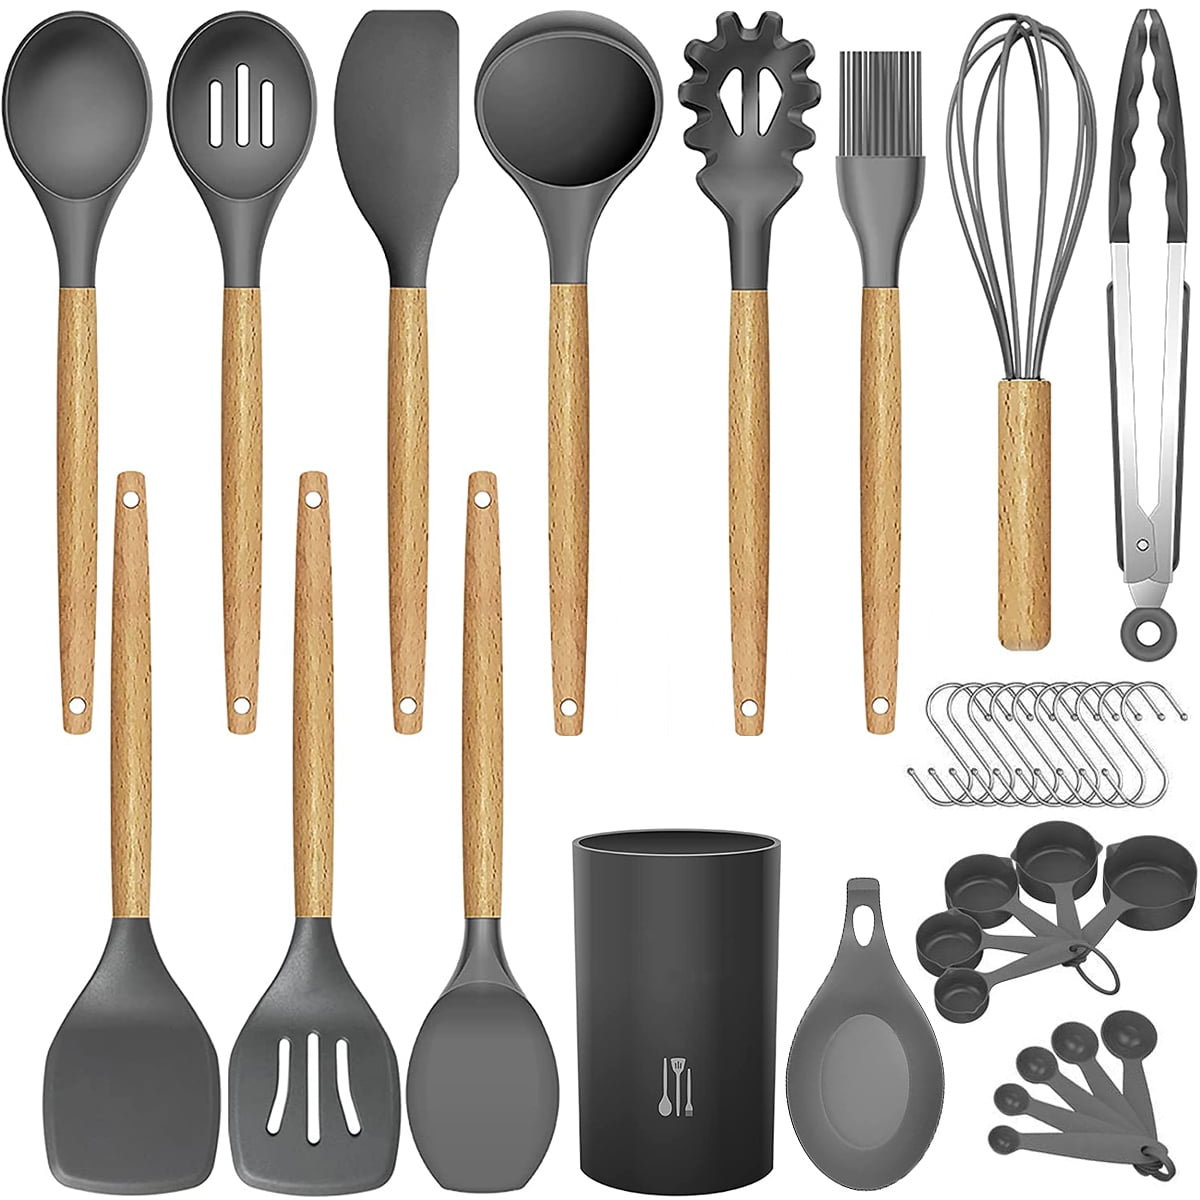 Grey Silicone Kitchen Utensils Set,12 Pcs Wooden Handles Spatula Set,Cooking Utensils for Non Stick Pans,Silicone Spatulas for Cooking Kitchen Gadgets Tools